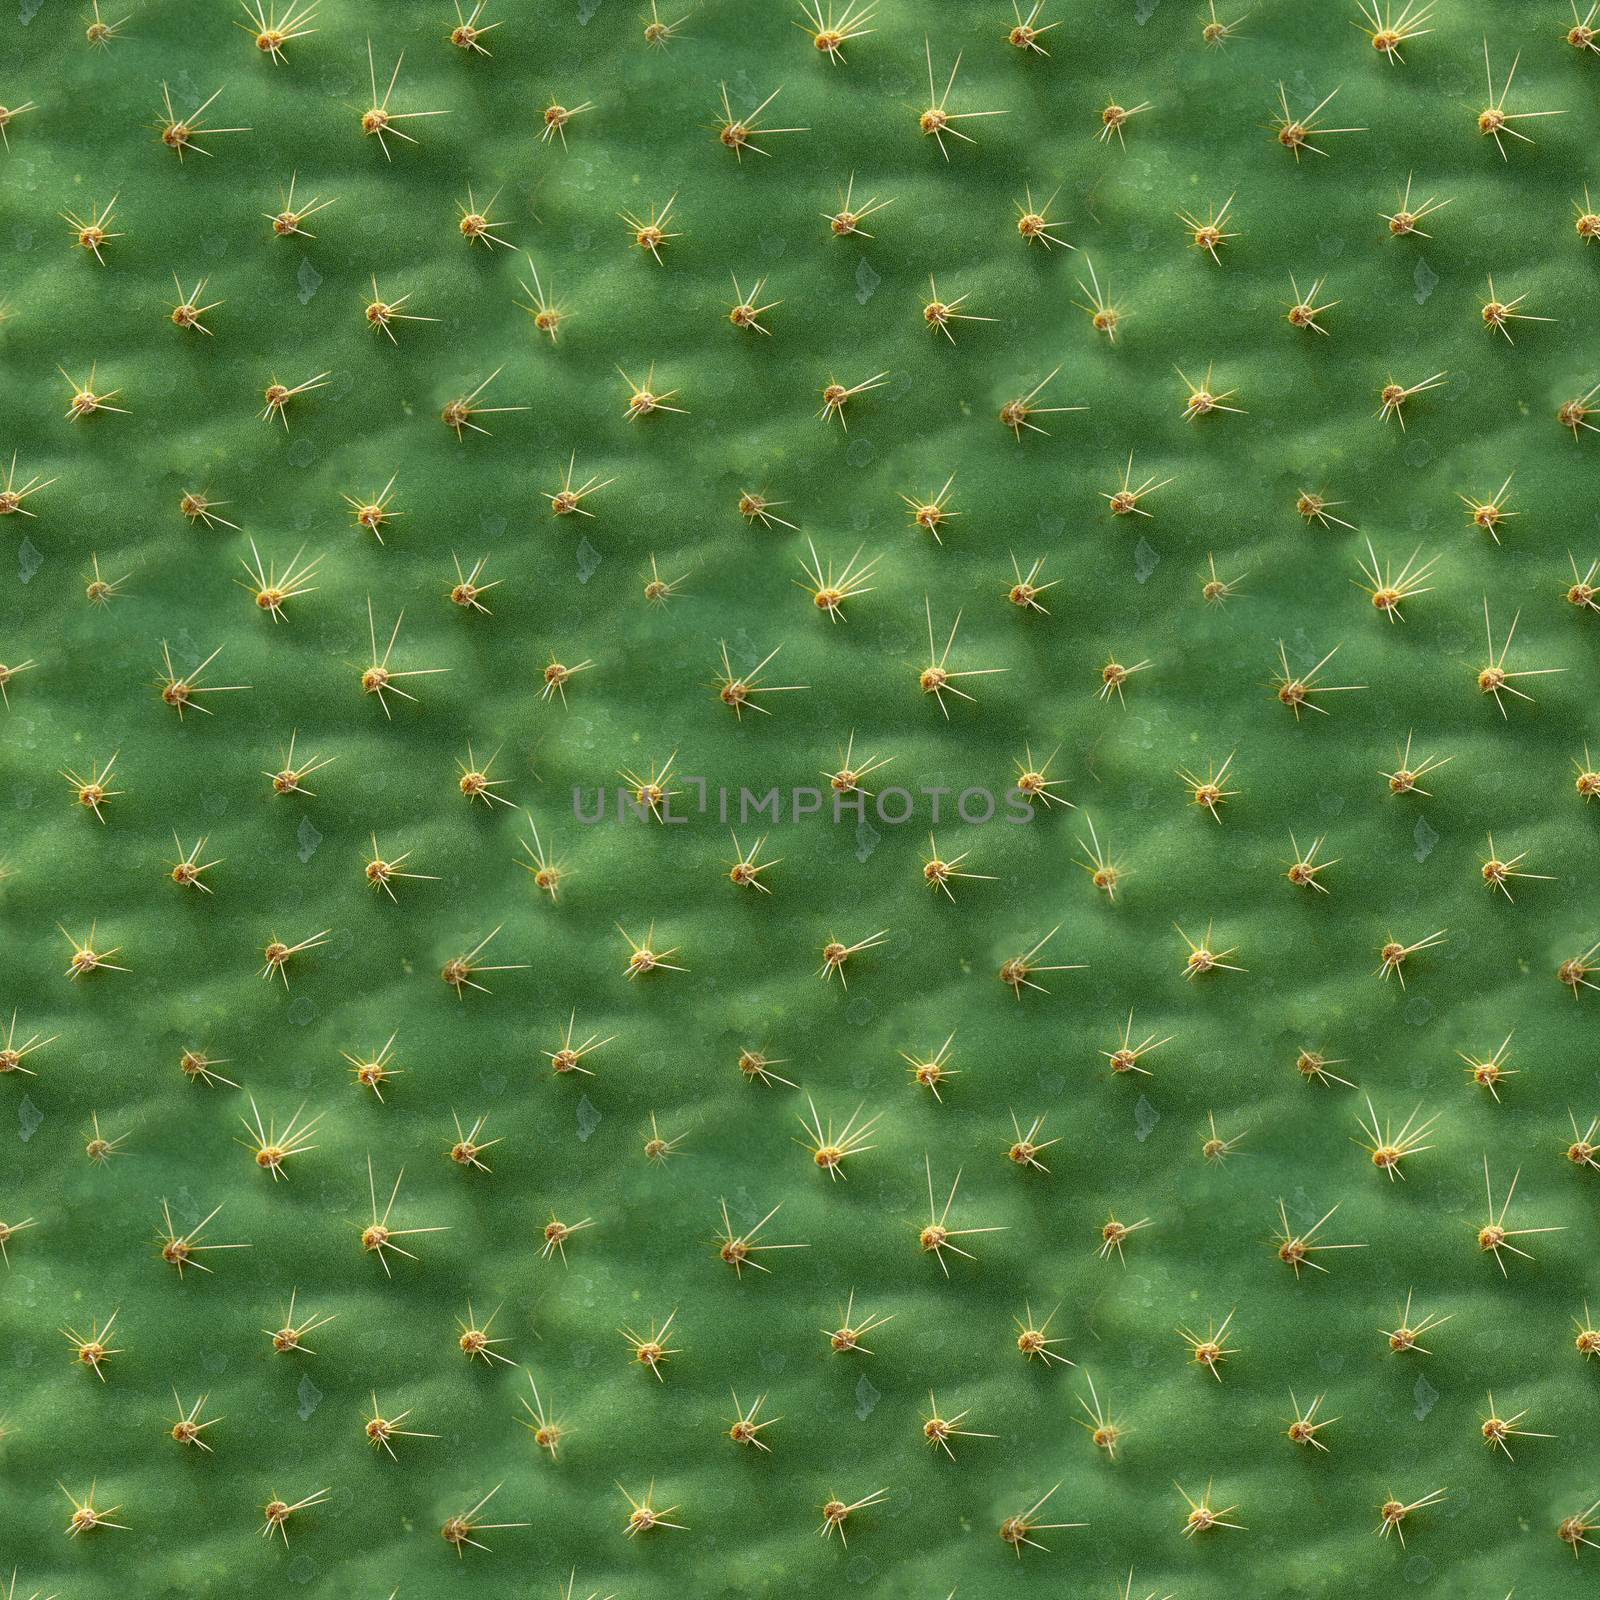 Seamless texture. Cactus leaf structure as background or wallpaper by Edophoto